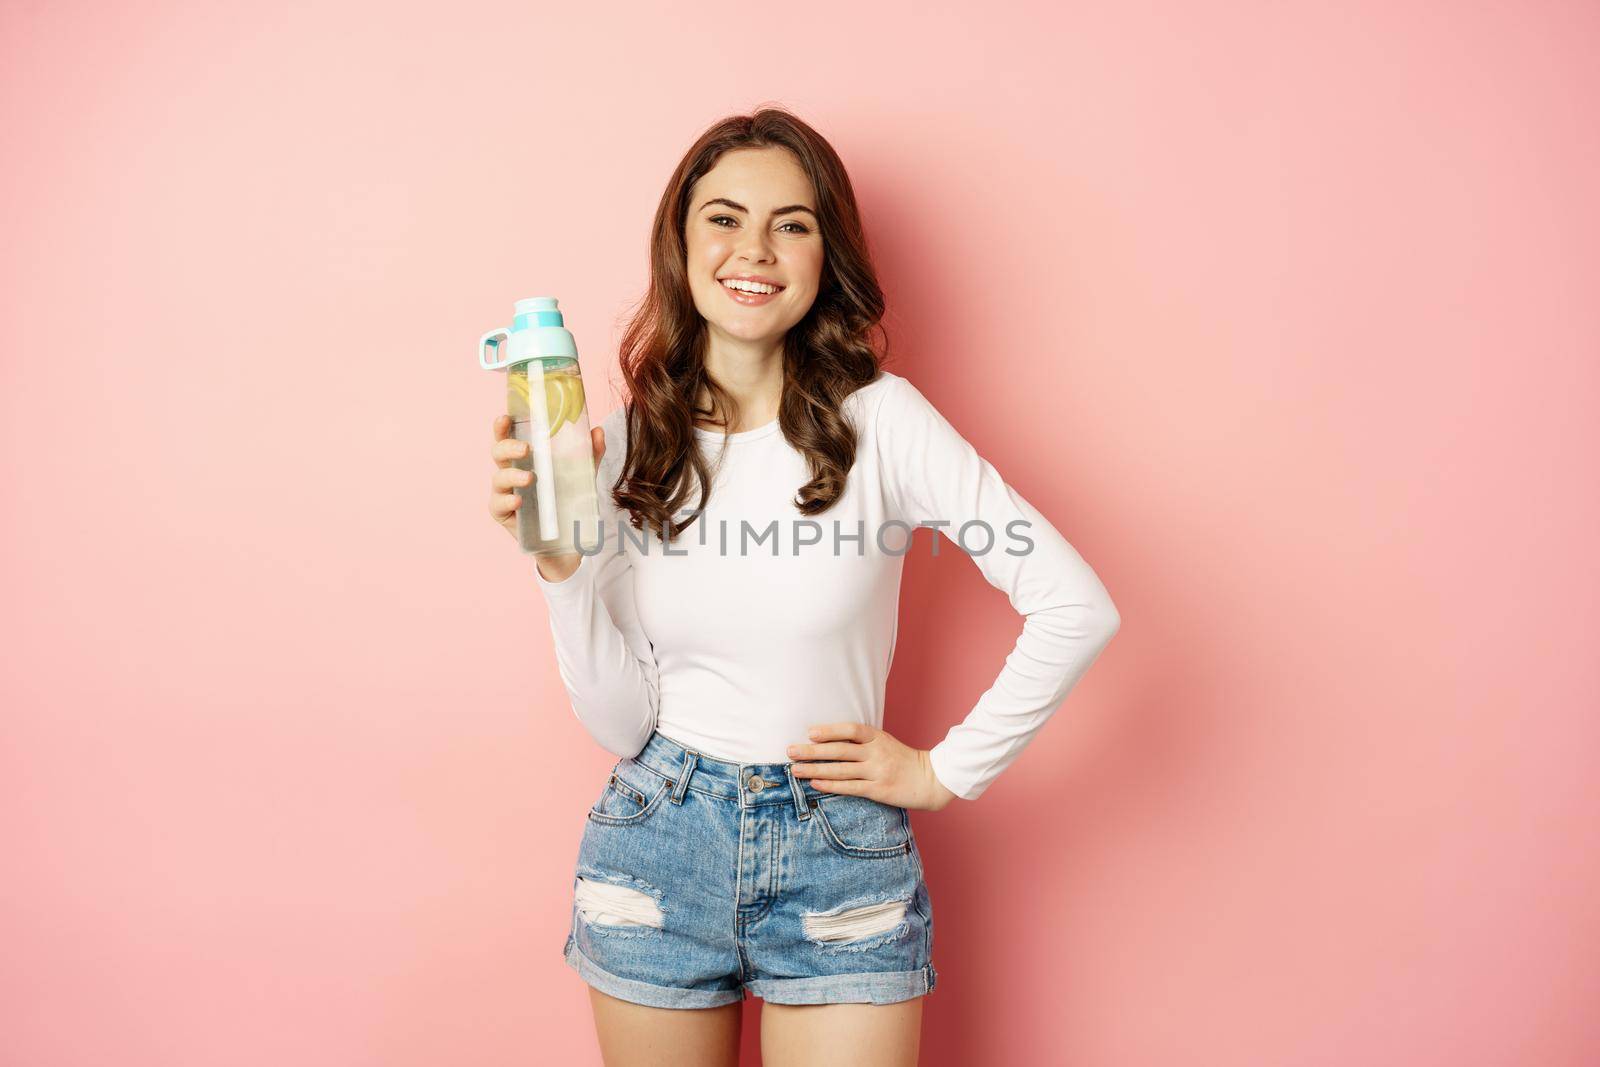 Healthy lifestyle. Happy smiling woman holding water bottle with lemon, vitamin c drink, looking joyful at camera, posing against pink background.